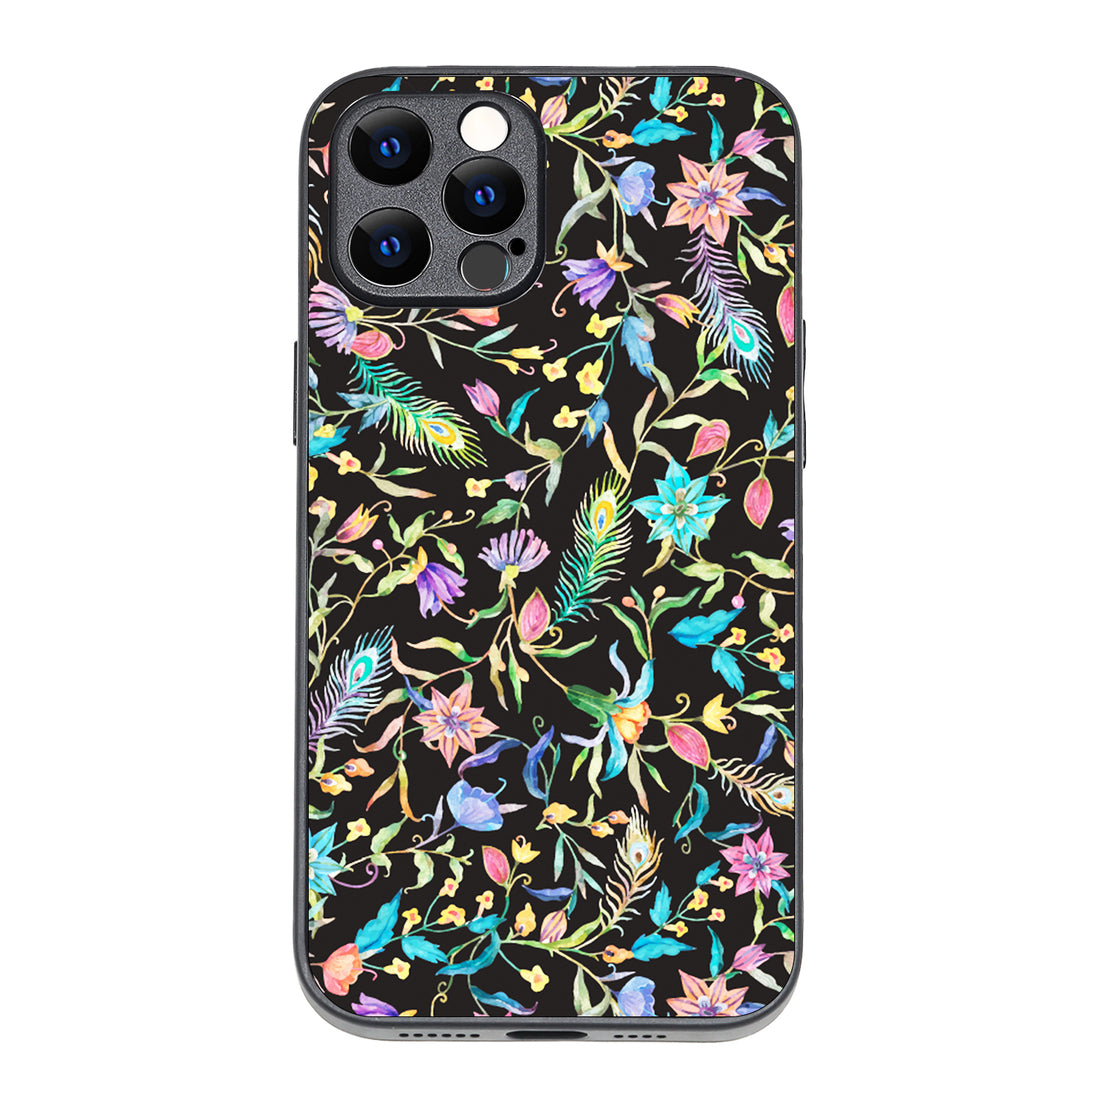 Flower Floral iPhone 12 Pro Max Case